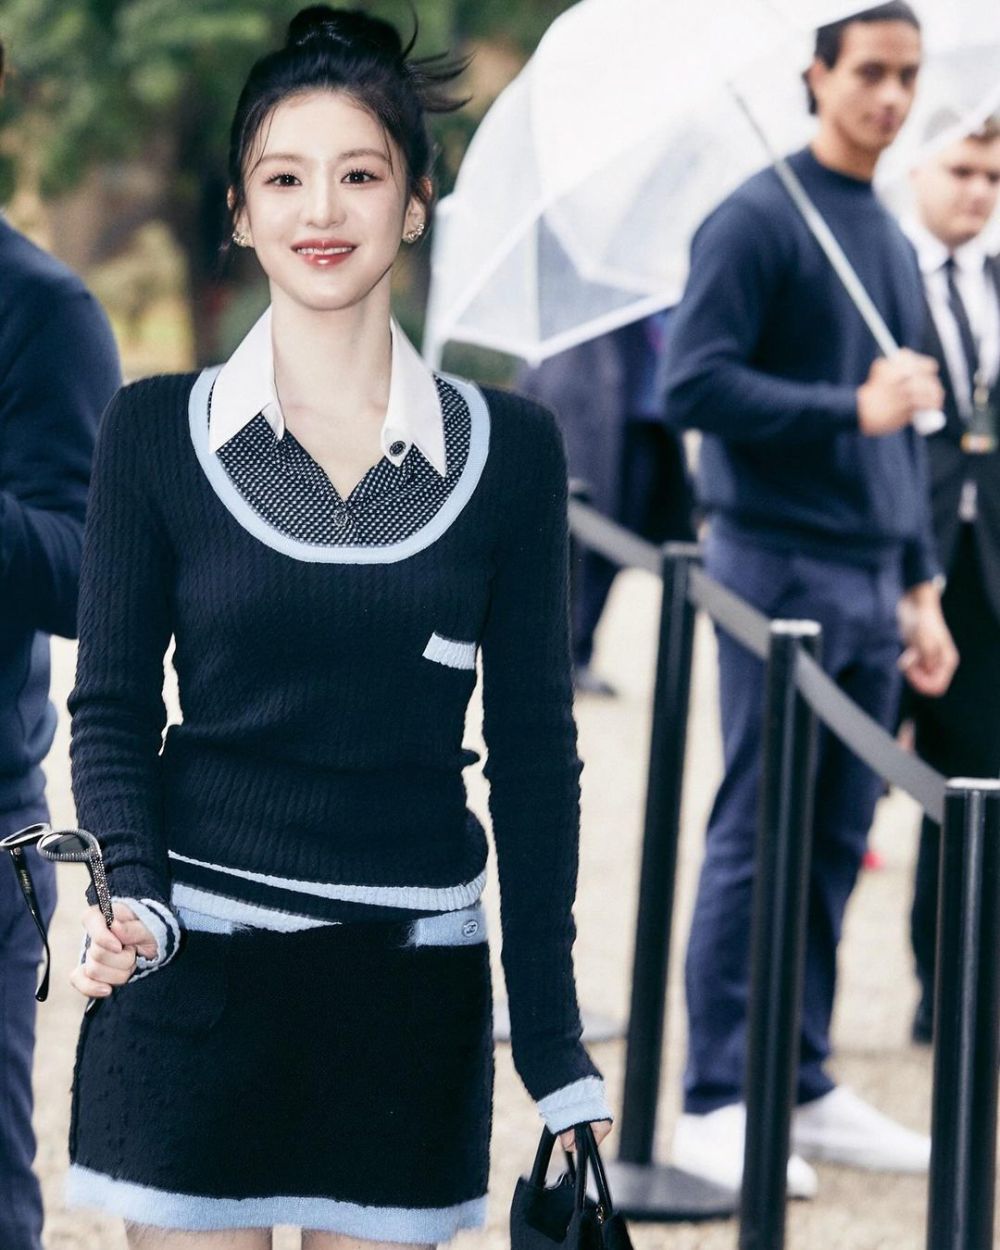 7 Portraits Of Go Yoon Jung At The Chanel Event As New Brand Ambassador!